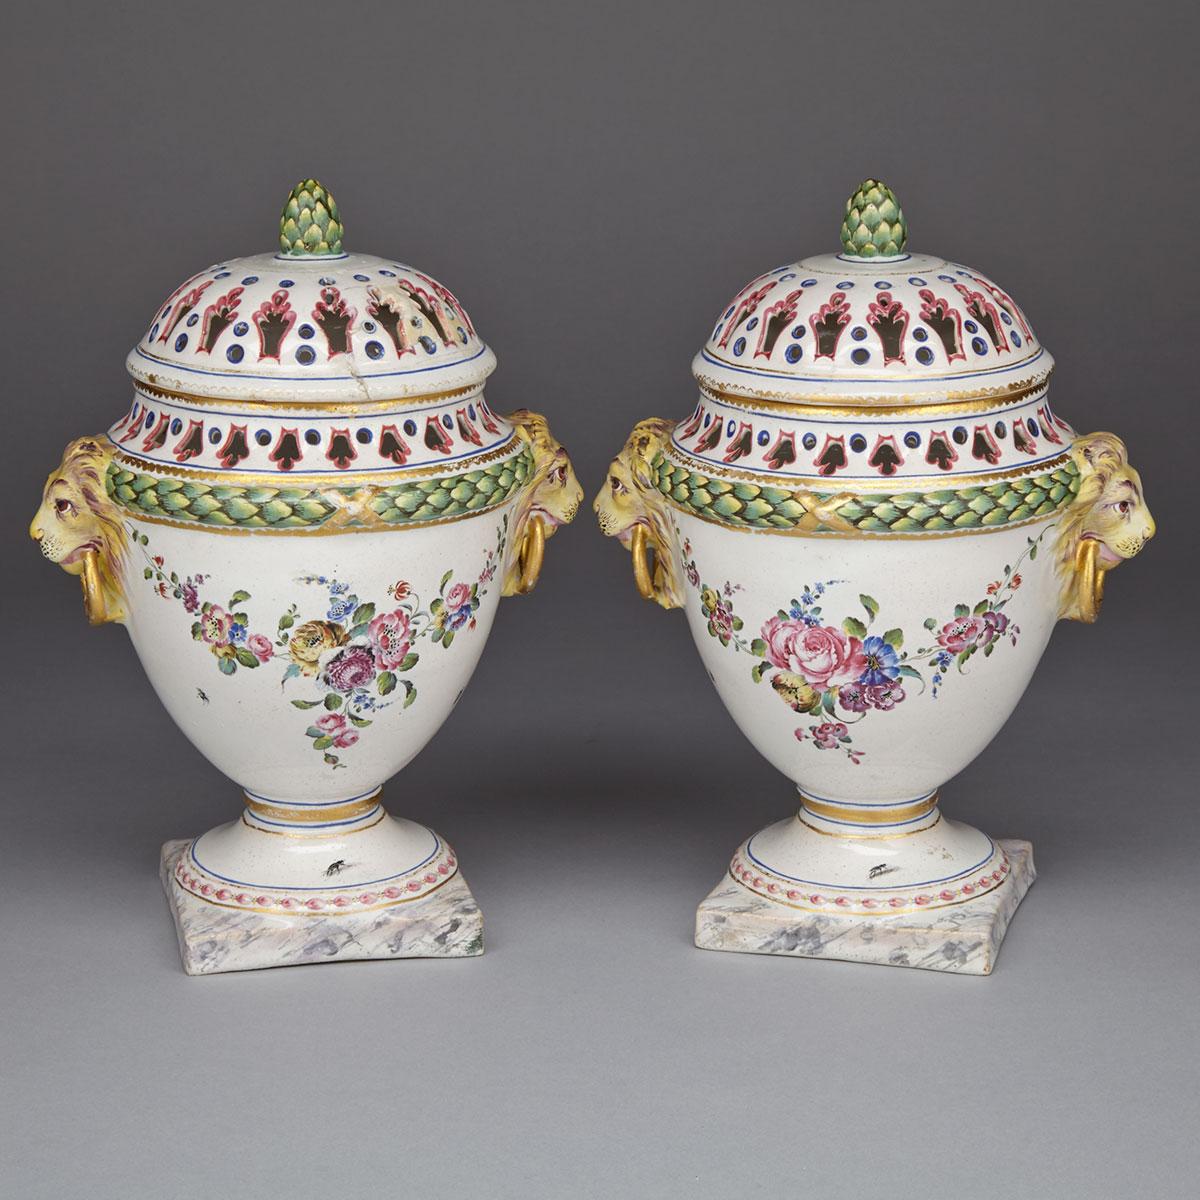 Pair of Sceaux Faience Potpourri Vases and Covers, late 18th century